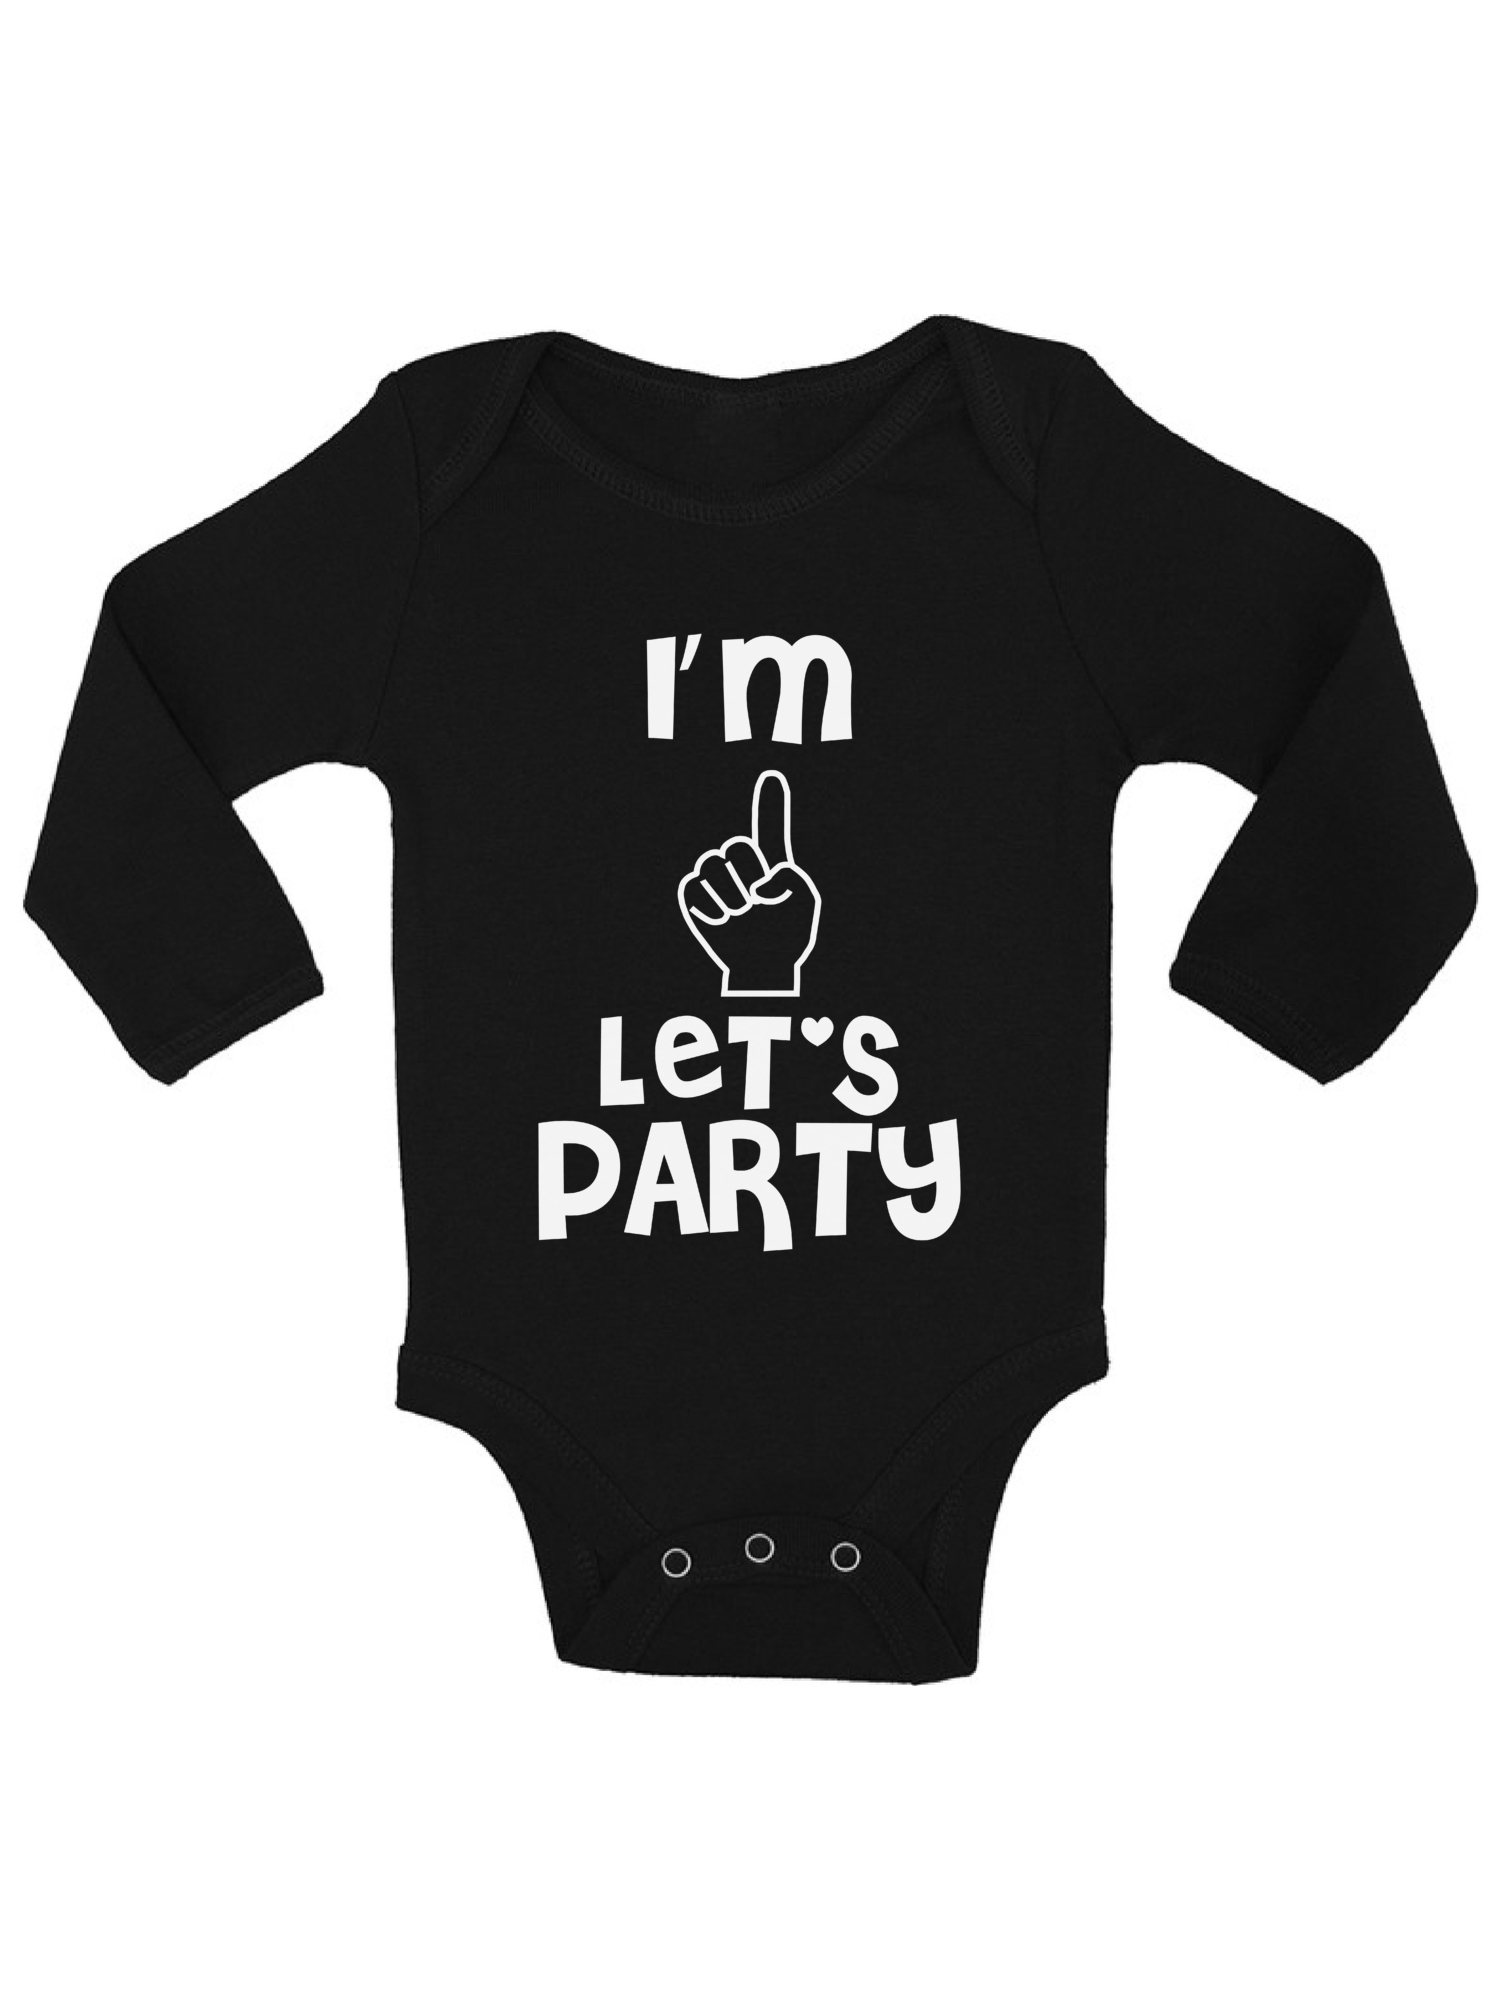 Awkward Styles Baby My First Birthday Outfits Girls Boys 1 Year Old Boy Girl Gifts Long Sleeve 1st Birthday Baby Bodysuit Baby Boy Baby Girl First Birthday Gifts Dinosaur Unicorn Birthday Party - image 1 of 4